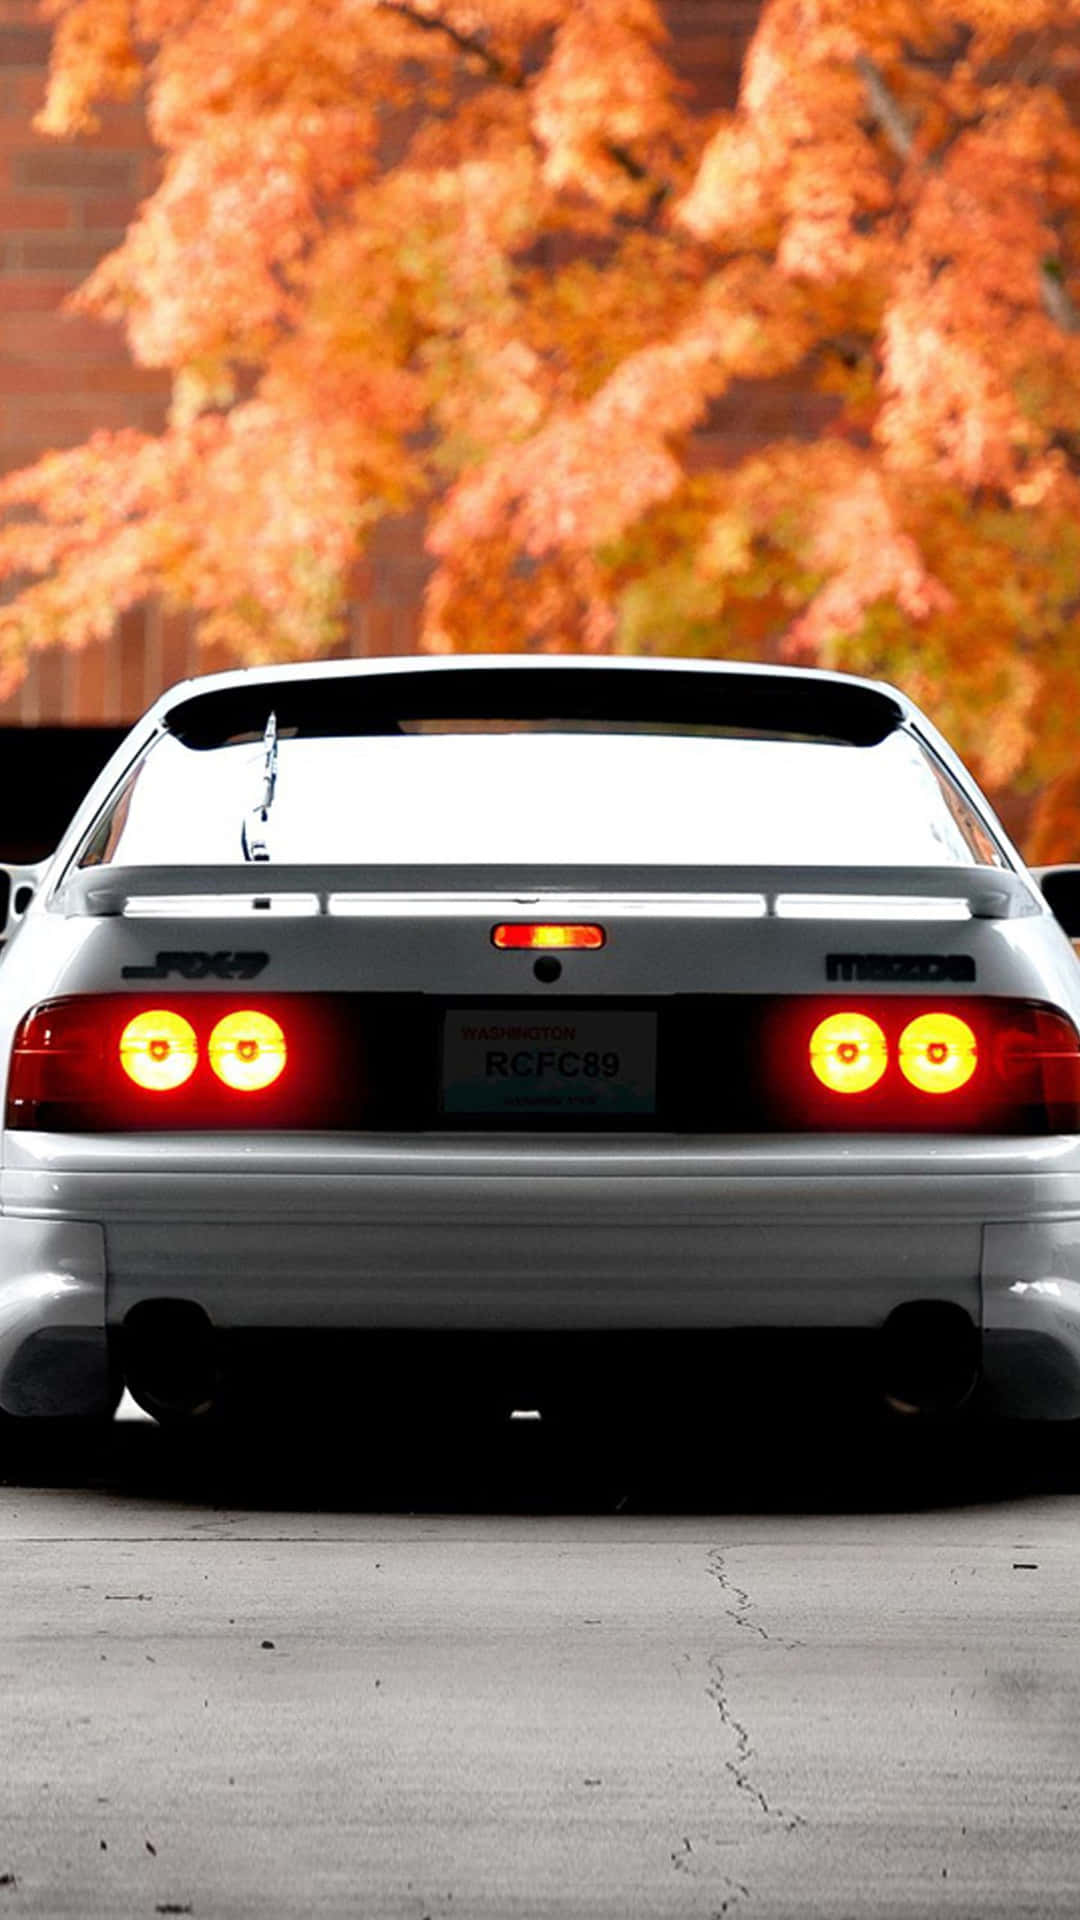 Initial D Mazda Rx7 FC3S wallpaper that i made from 2 google images   rMobileWallpaper